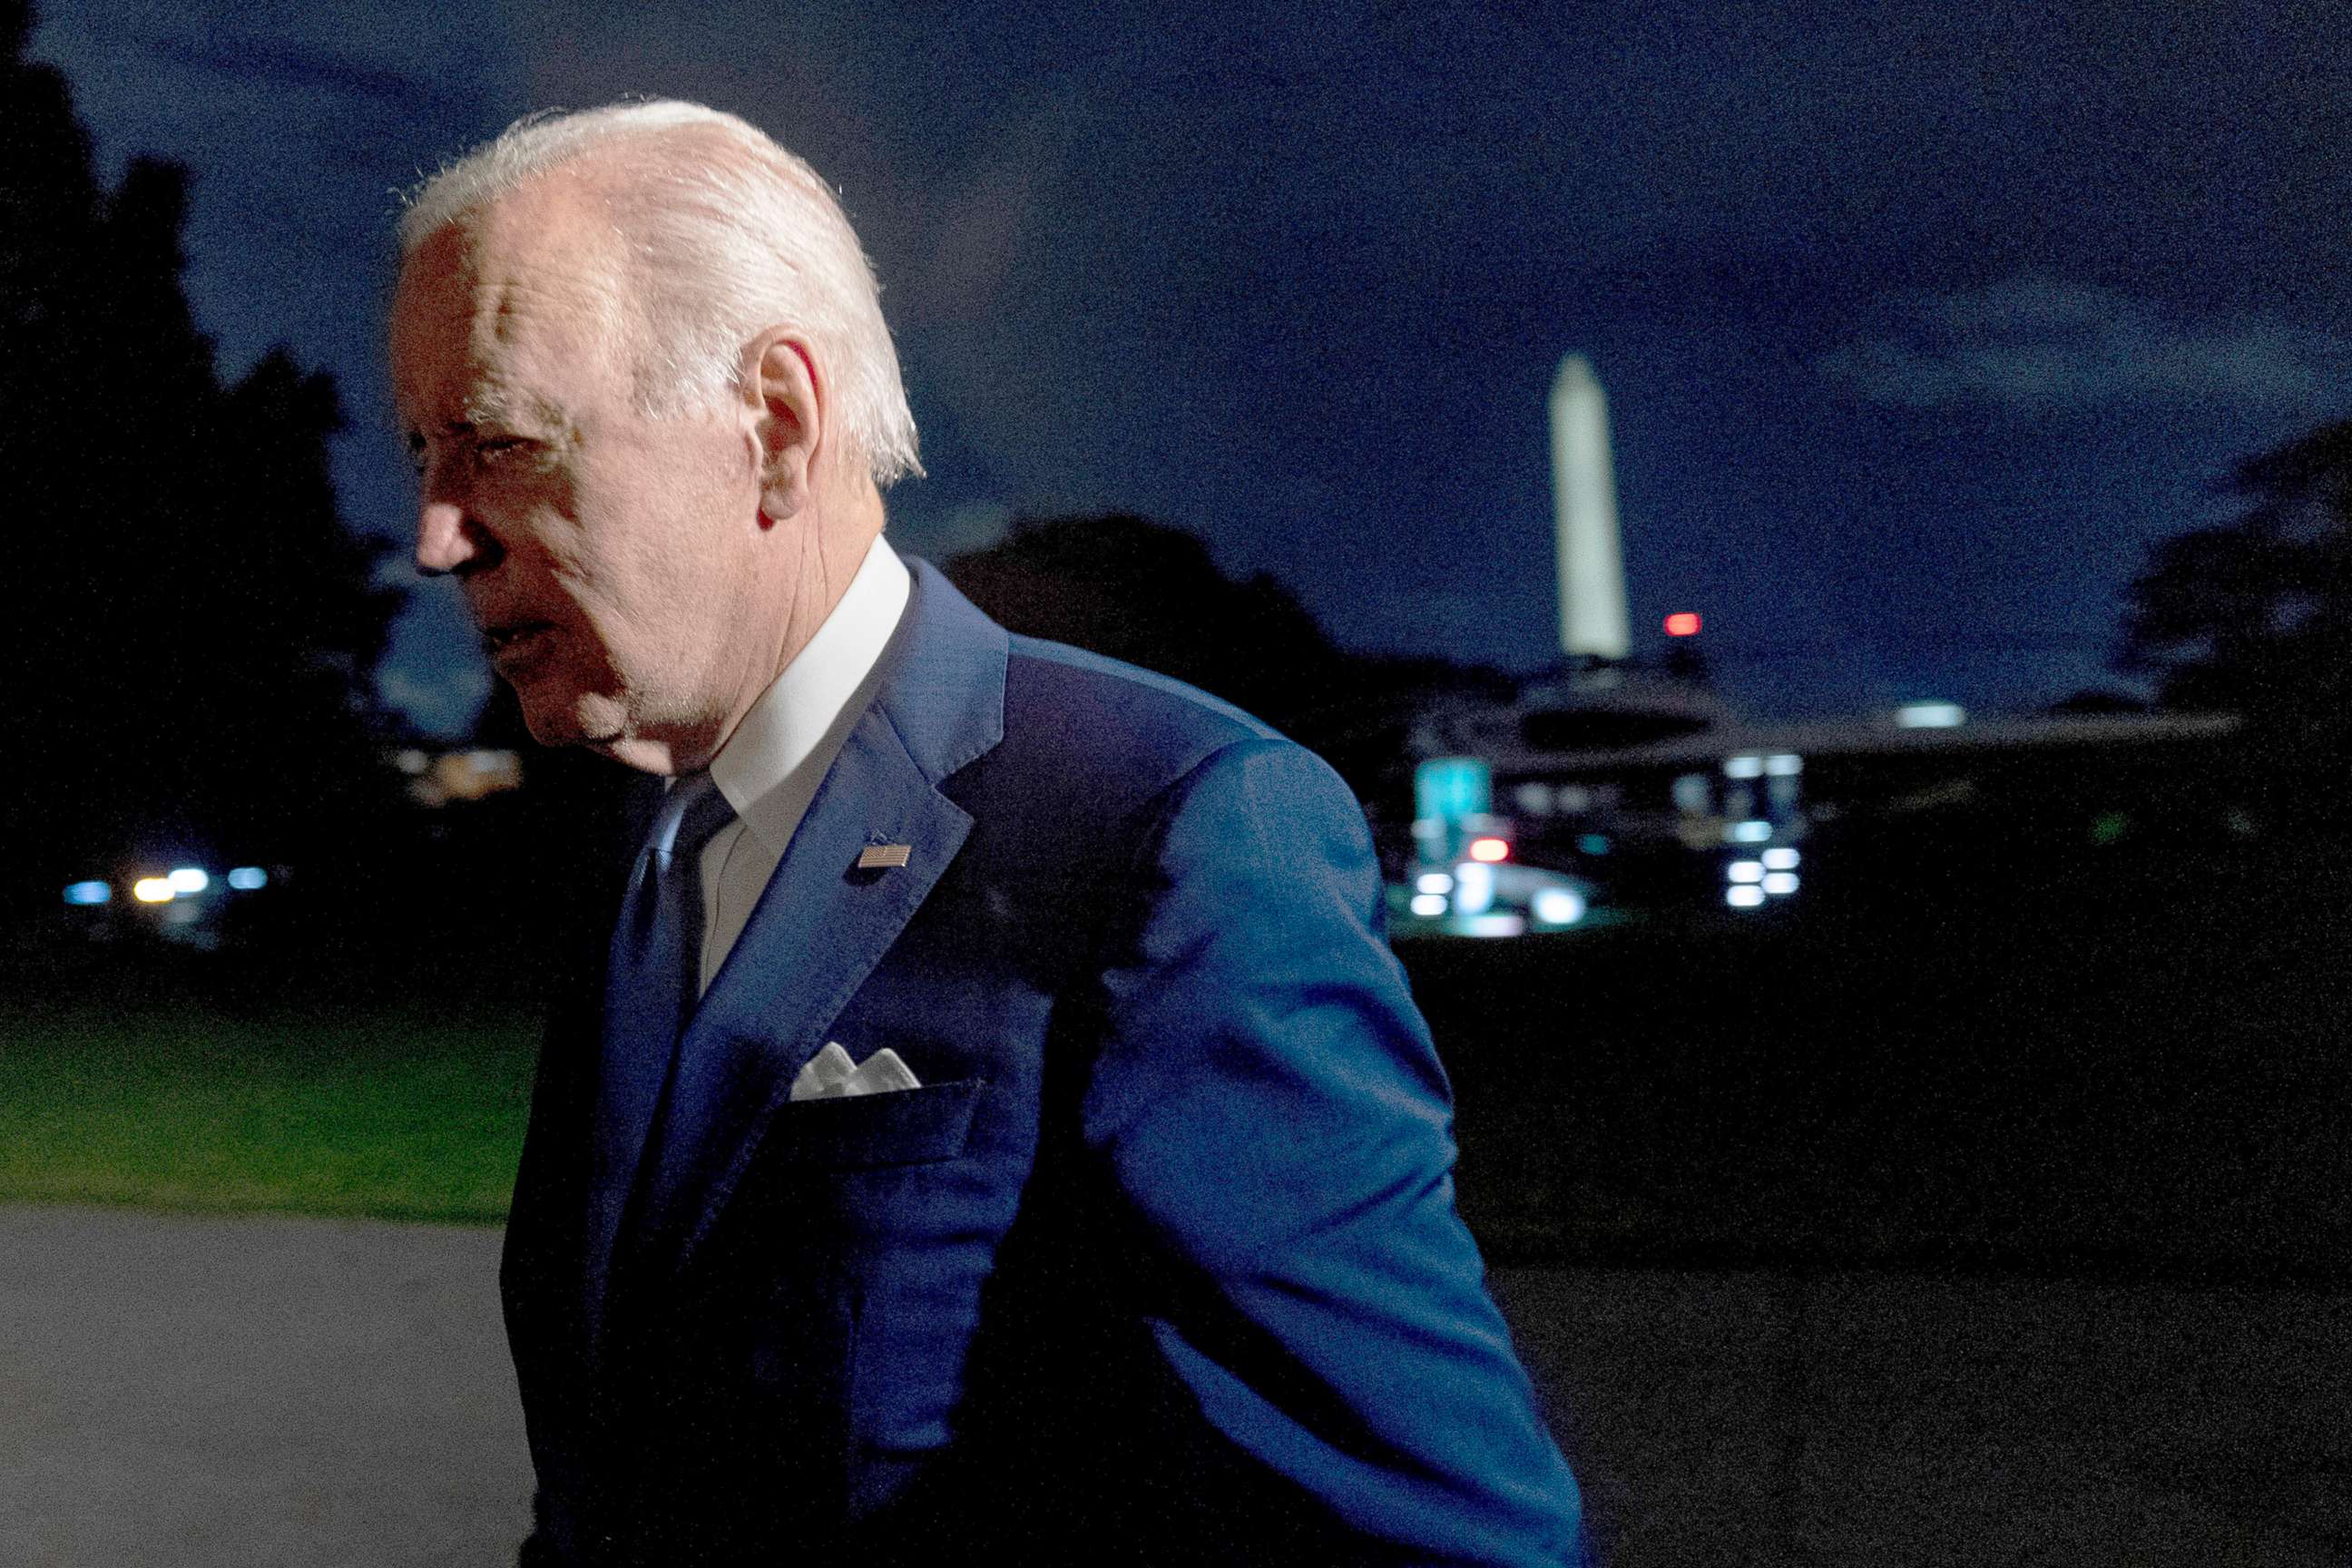 PHOTO: President Joe Biden arrives at the White House after returning from a trip to Israel and Saudi Arabia, in Washington, July 16, 2022.